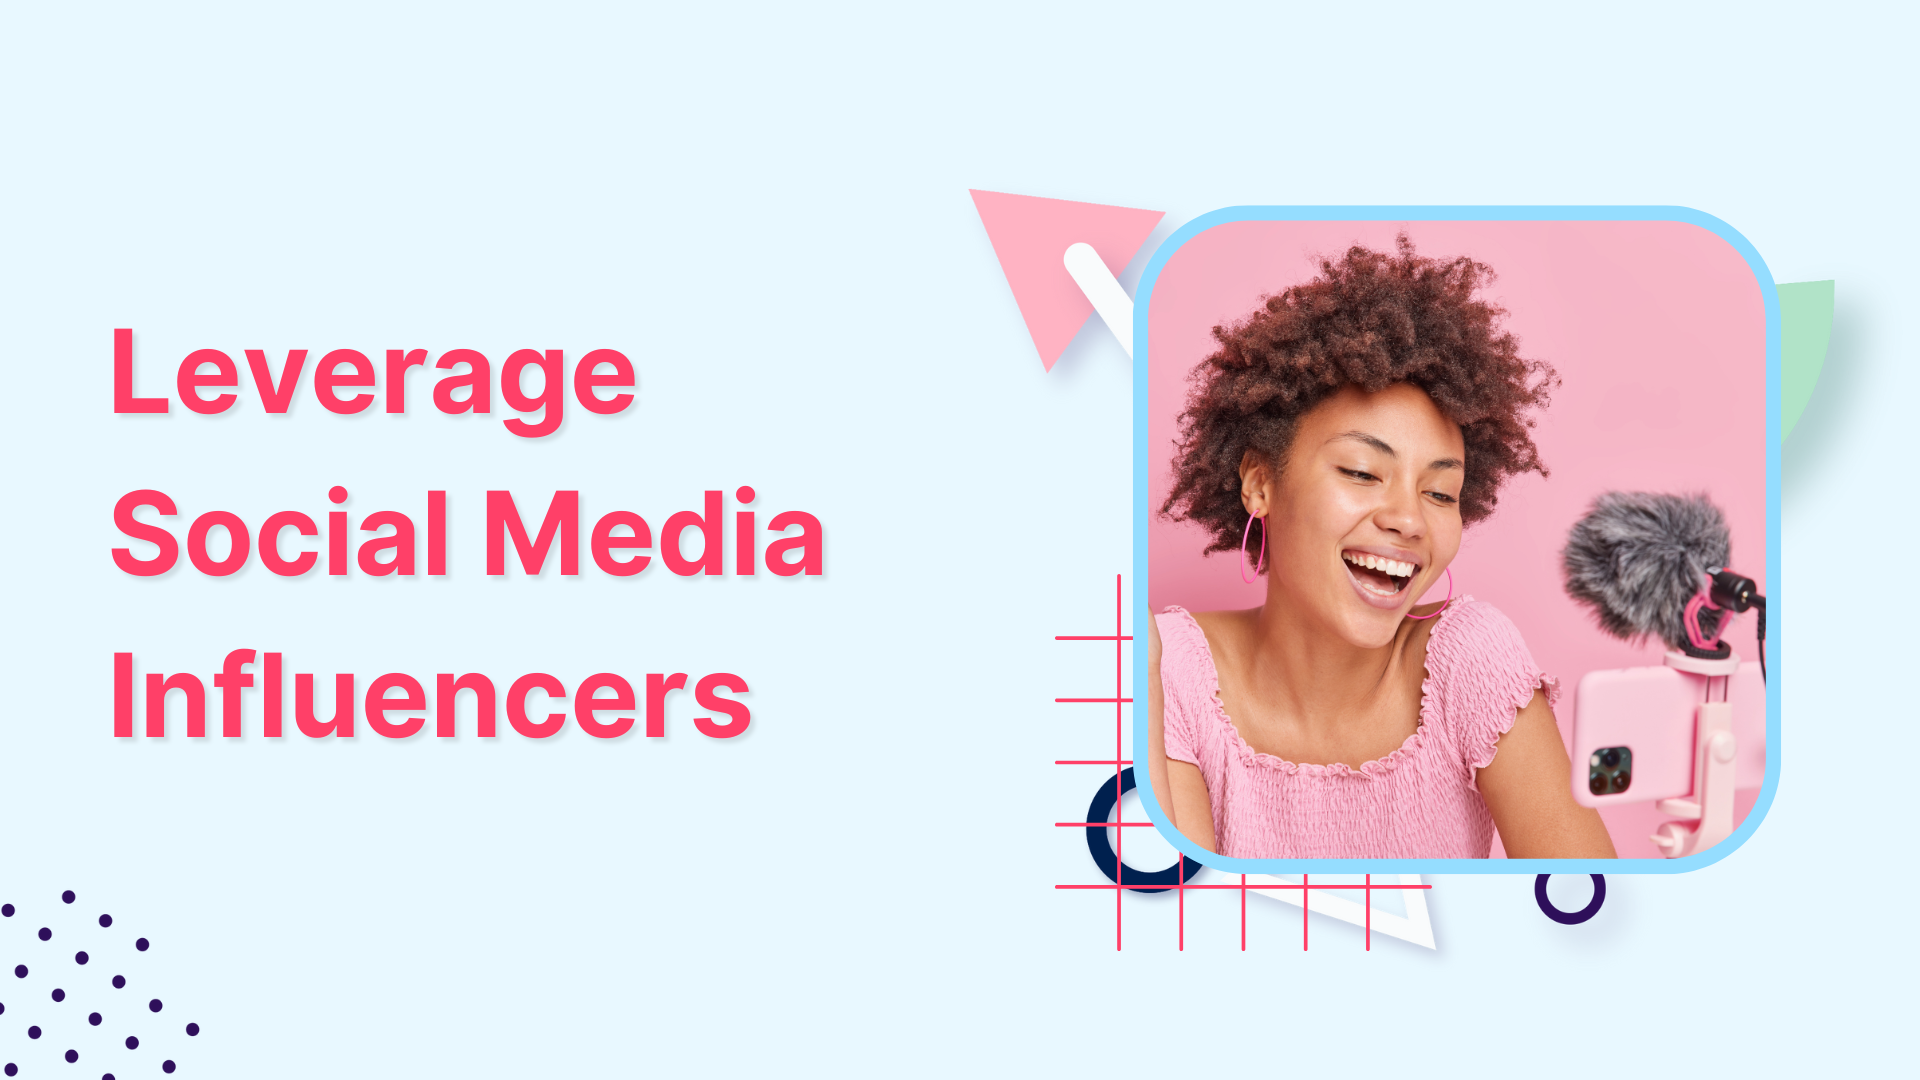 How to Leverage Social Media Influencers to Discover New Audiences